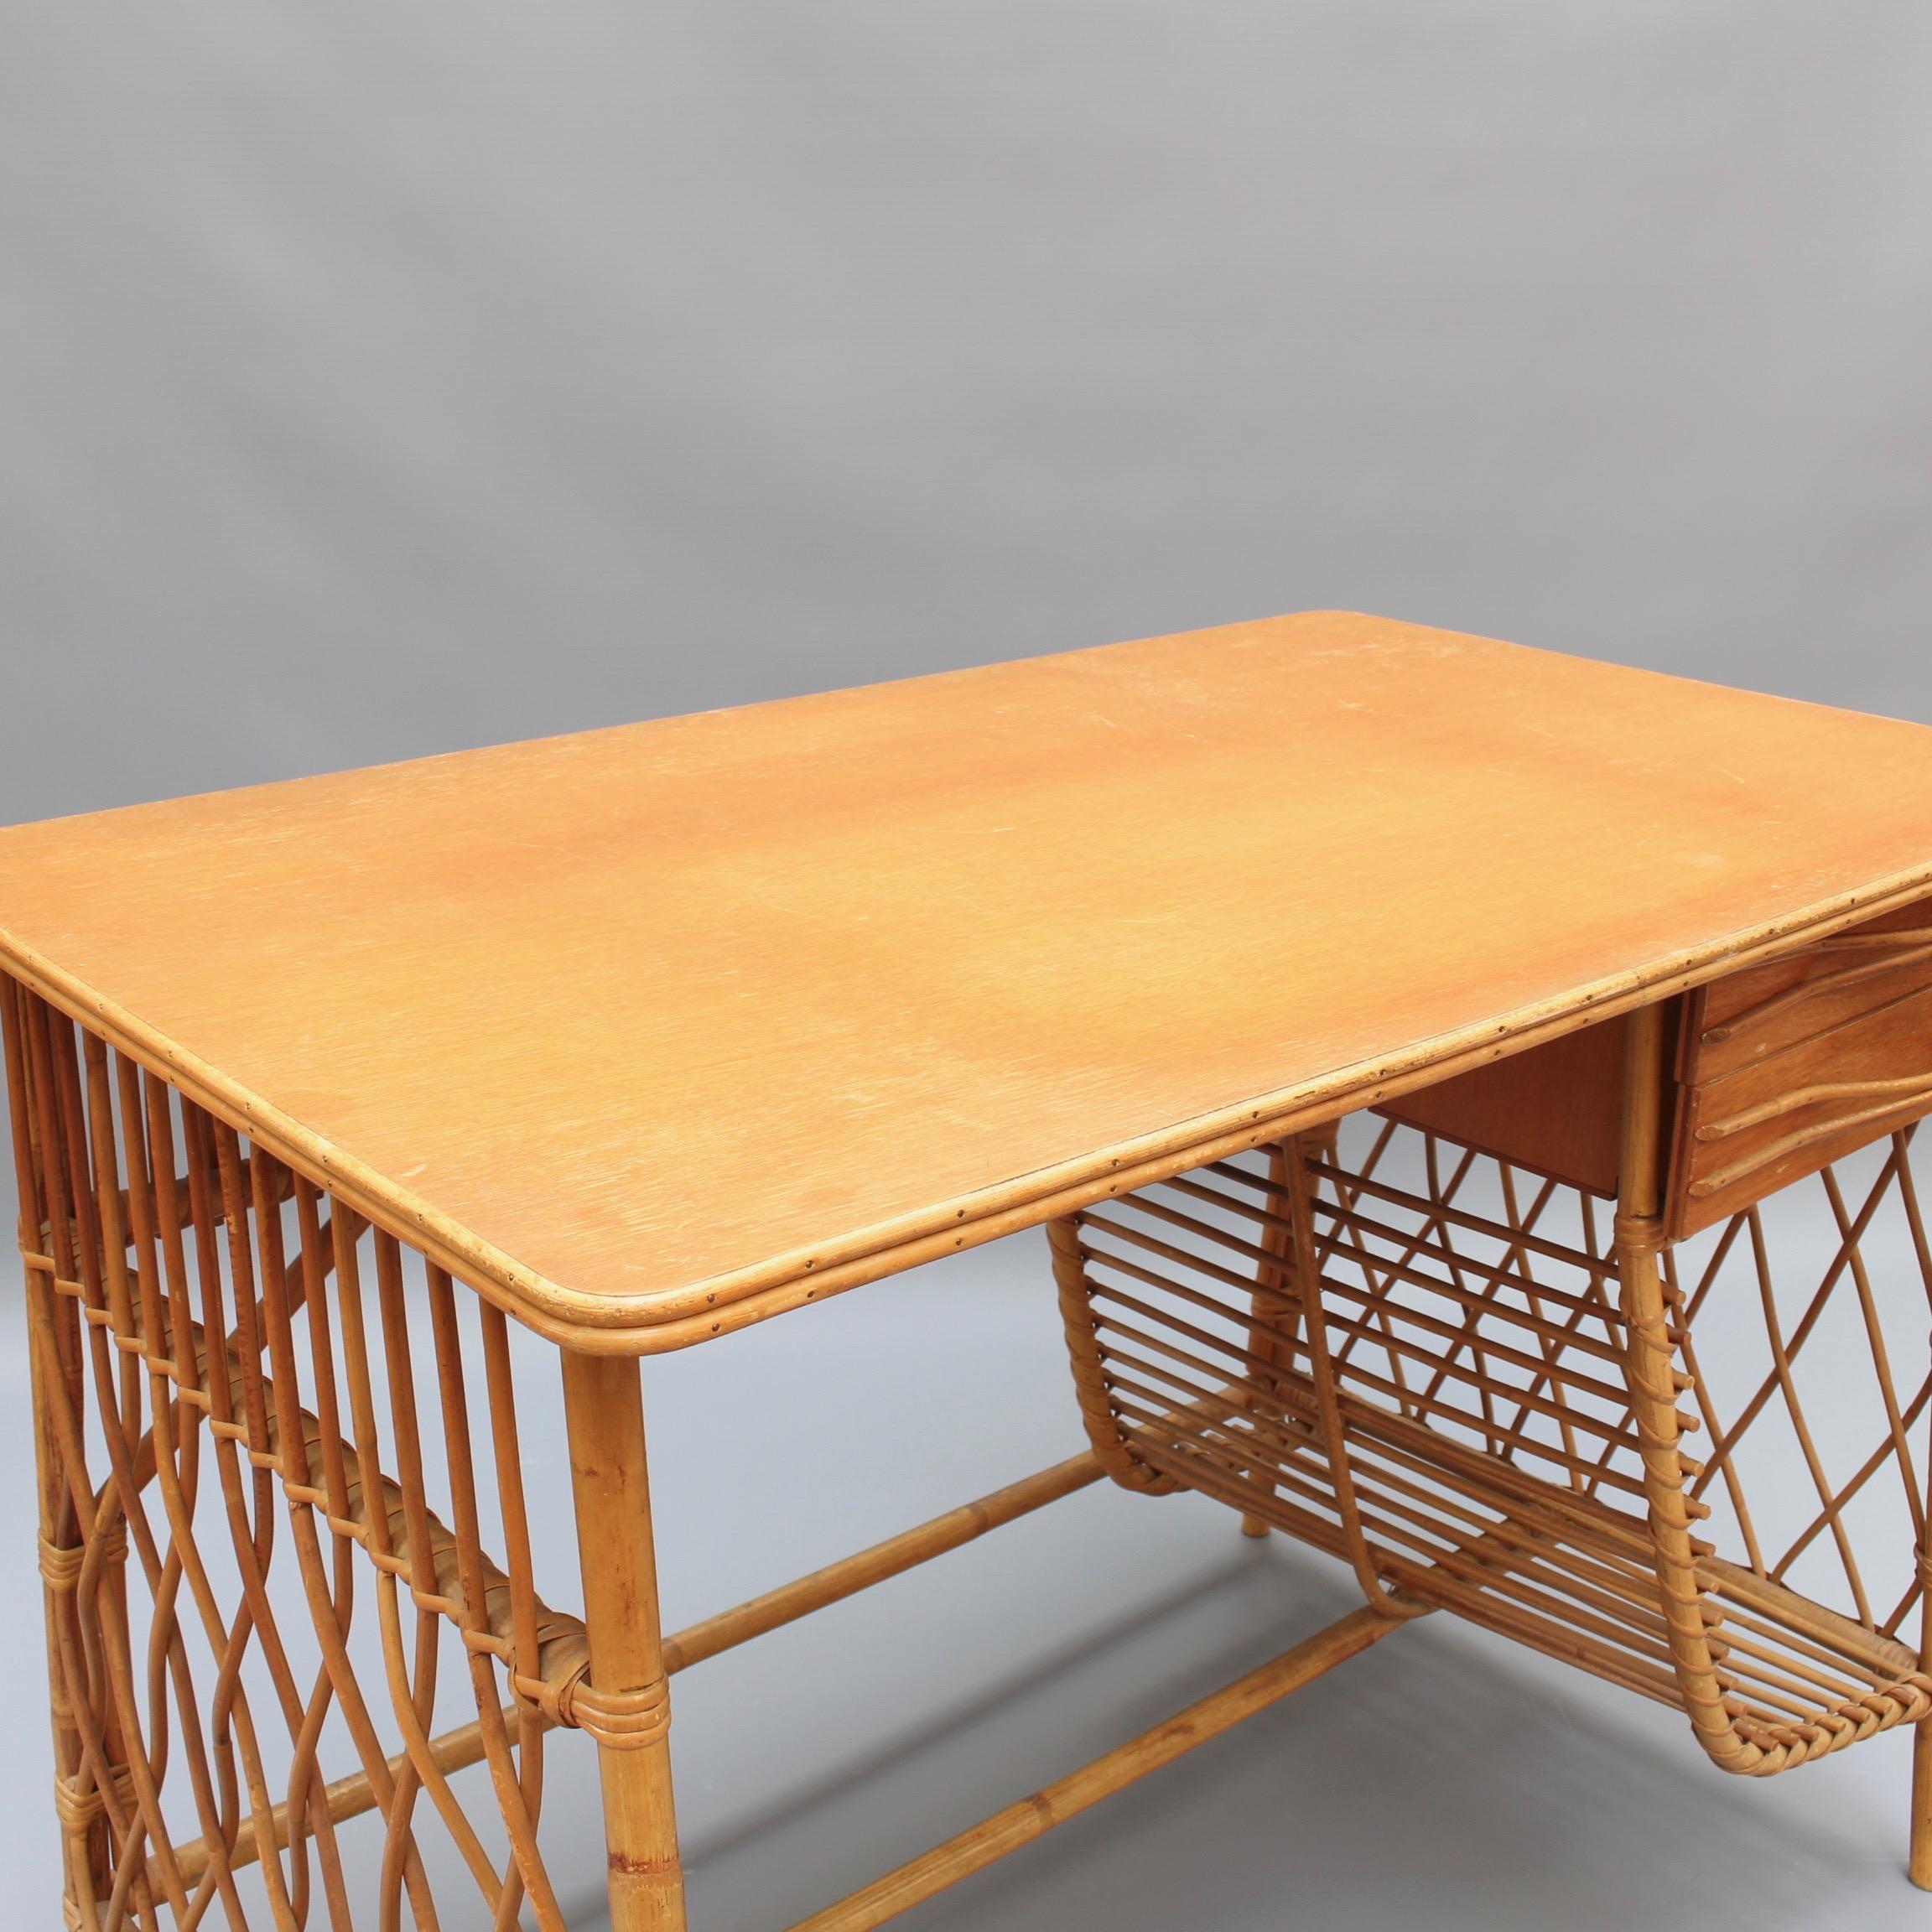 Mid-20th Century Rattan Desk / Vanity Table and Chair by Louis Sognot, circa 1950s